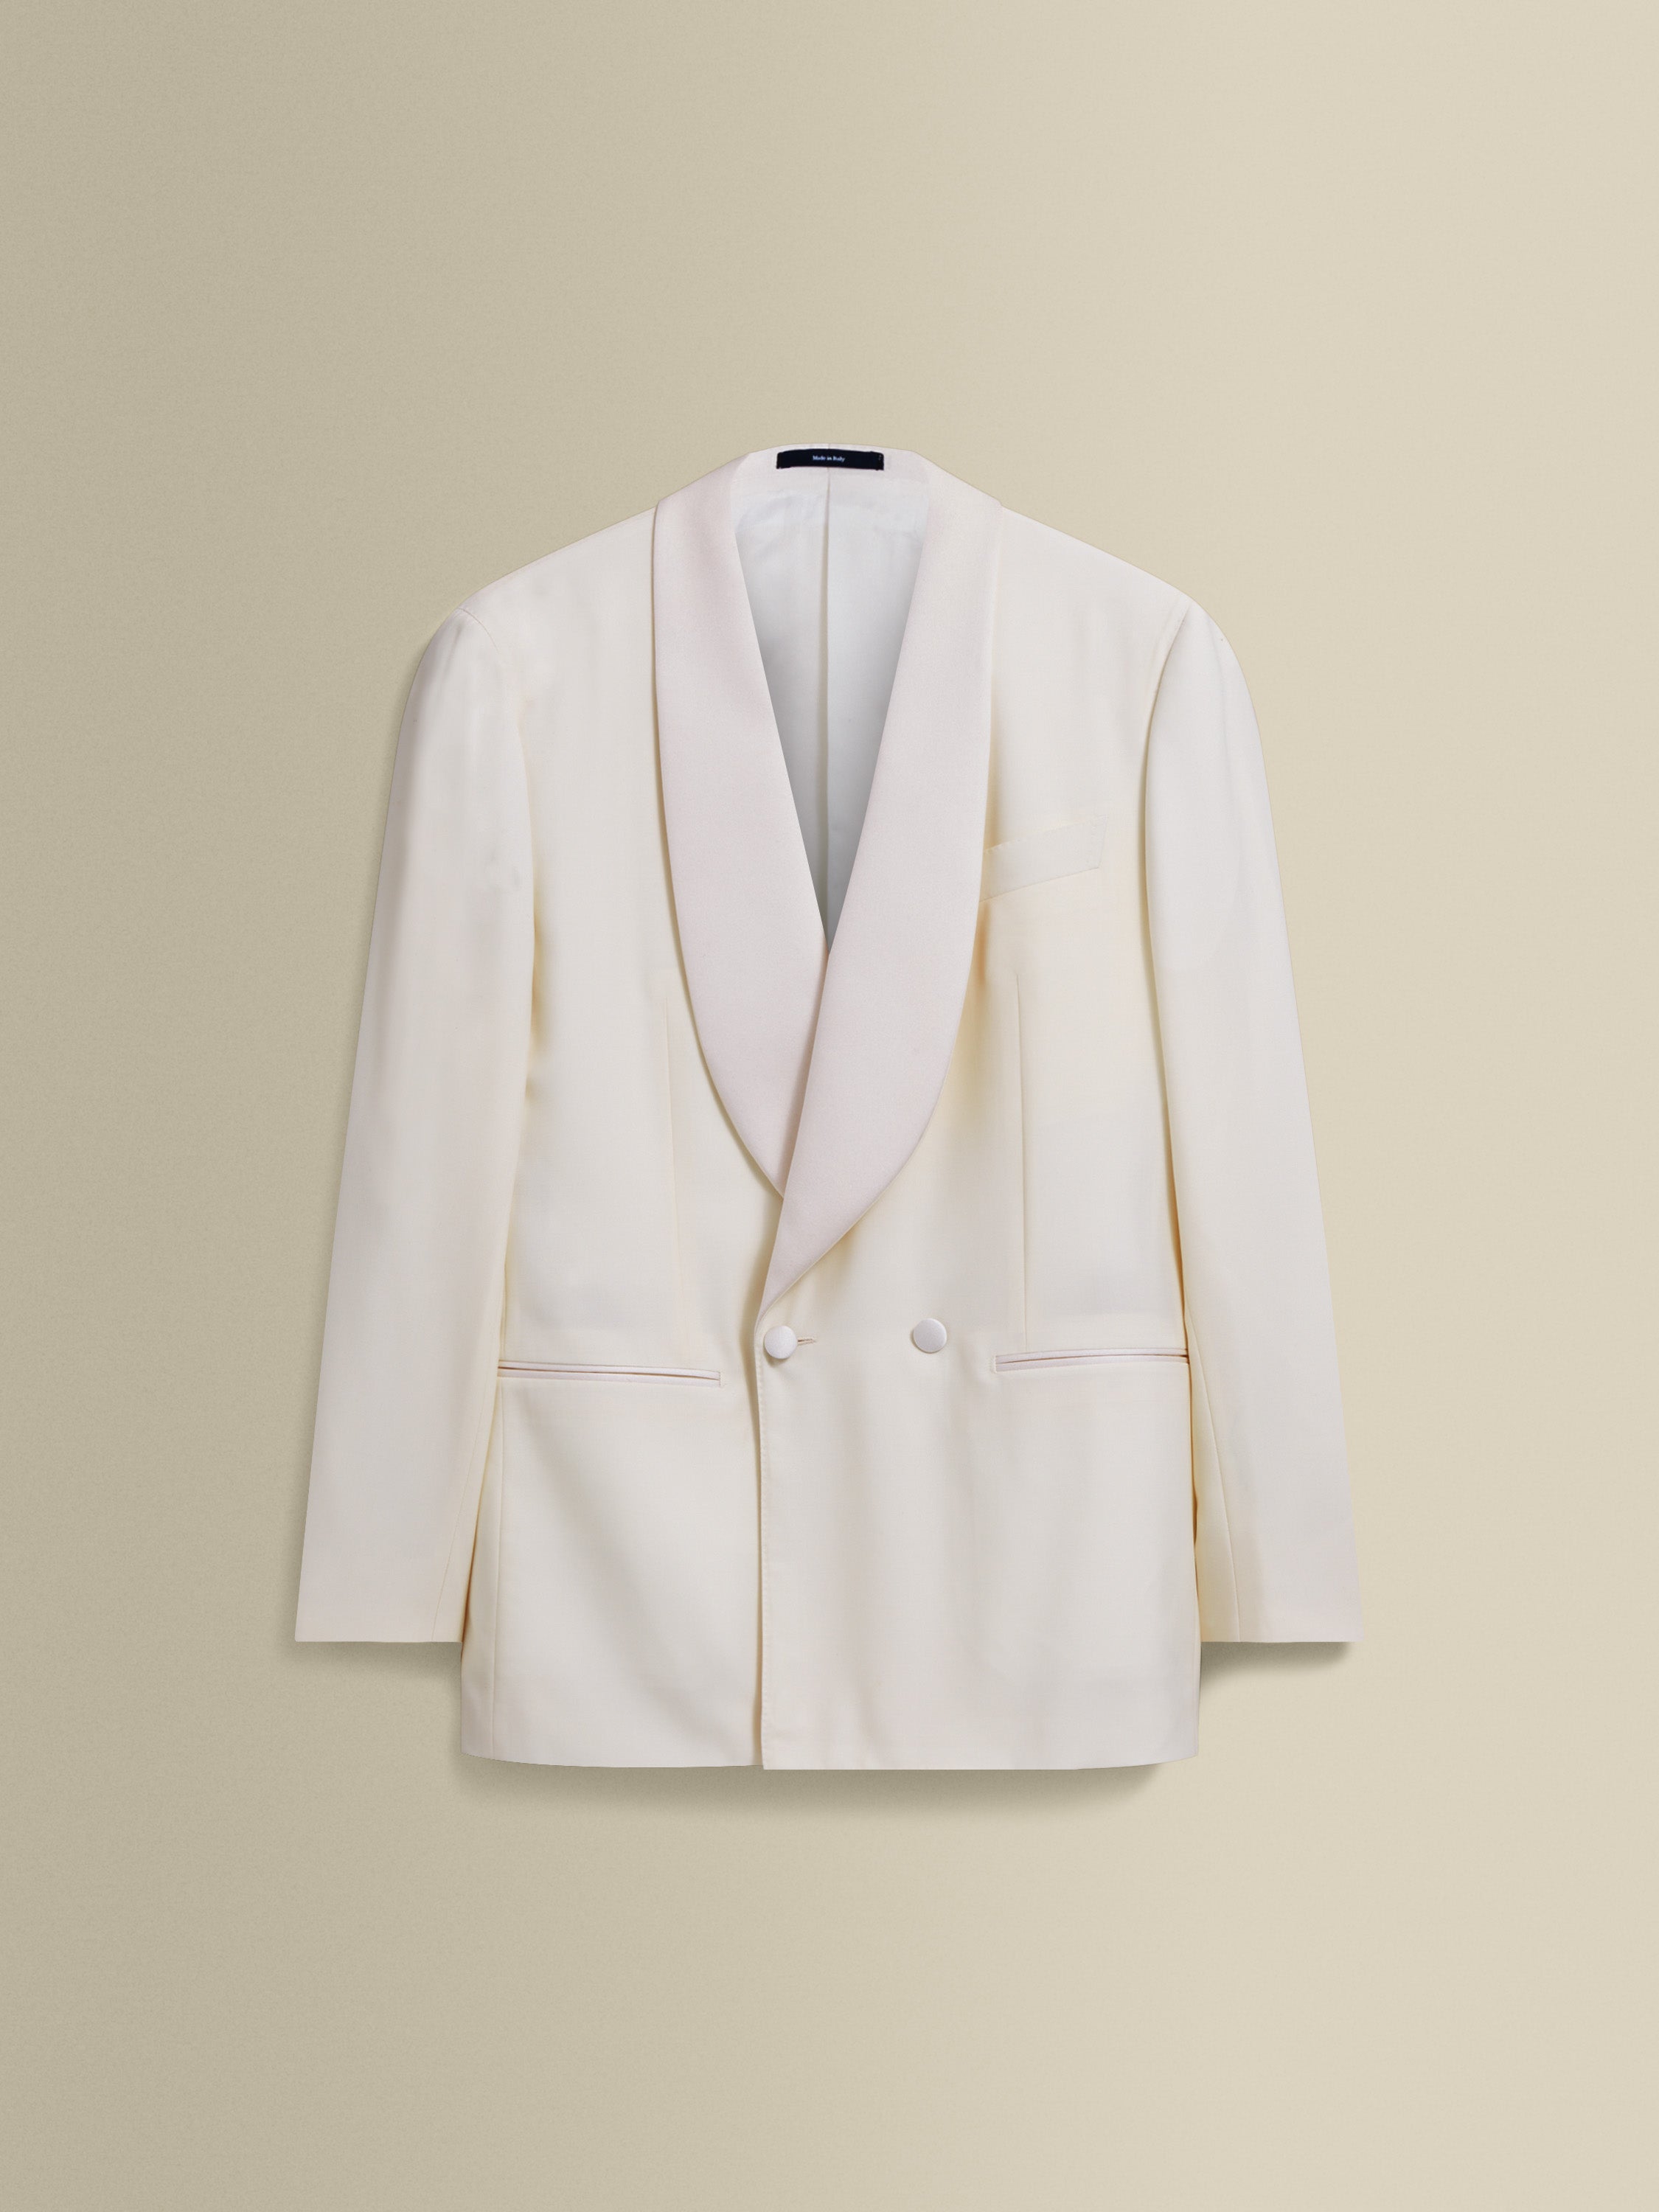 Wool Double Breasted Shawl Lapel Dinner Jacket White Product